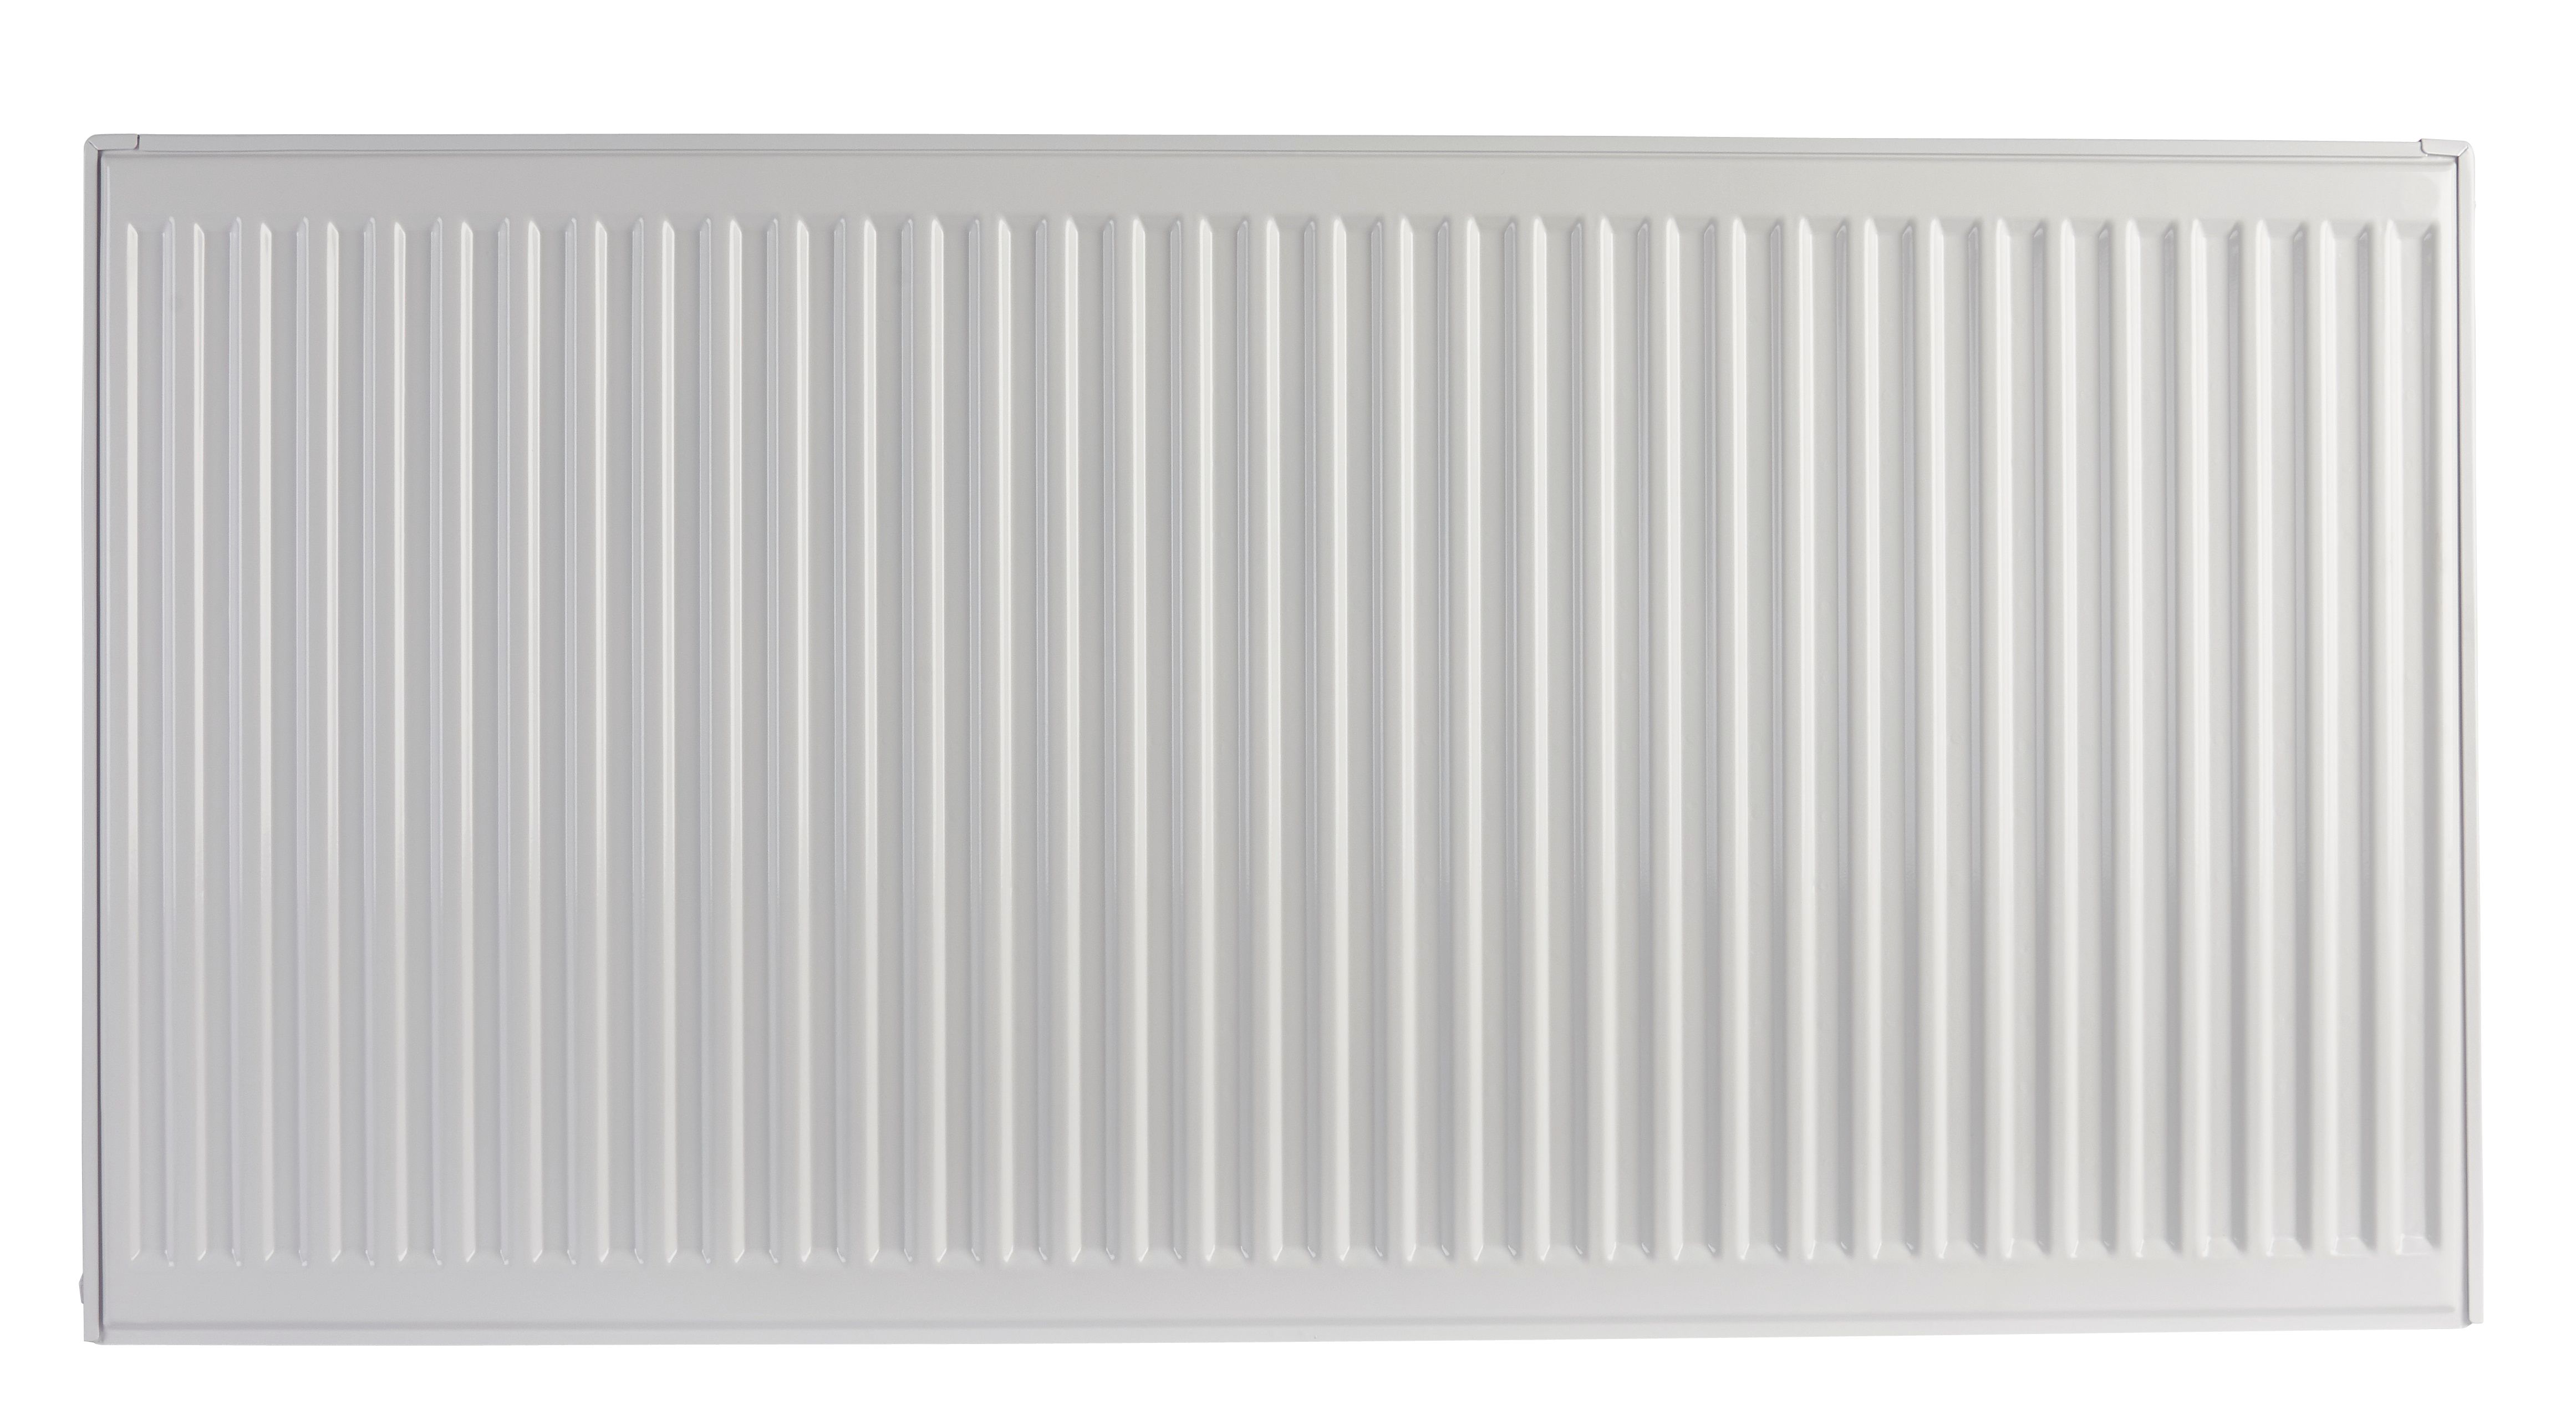 Homeline by Stelrad 600 x 1000mm Type 21 Double Panel Plus Single Convector Radiator